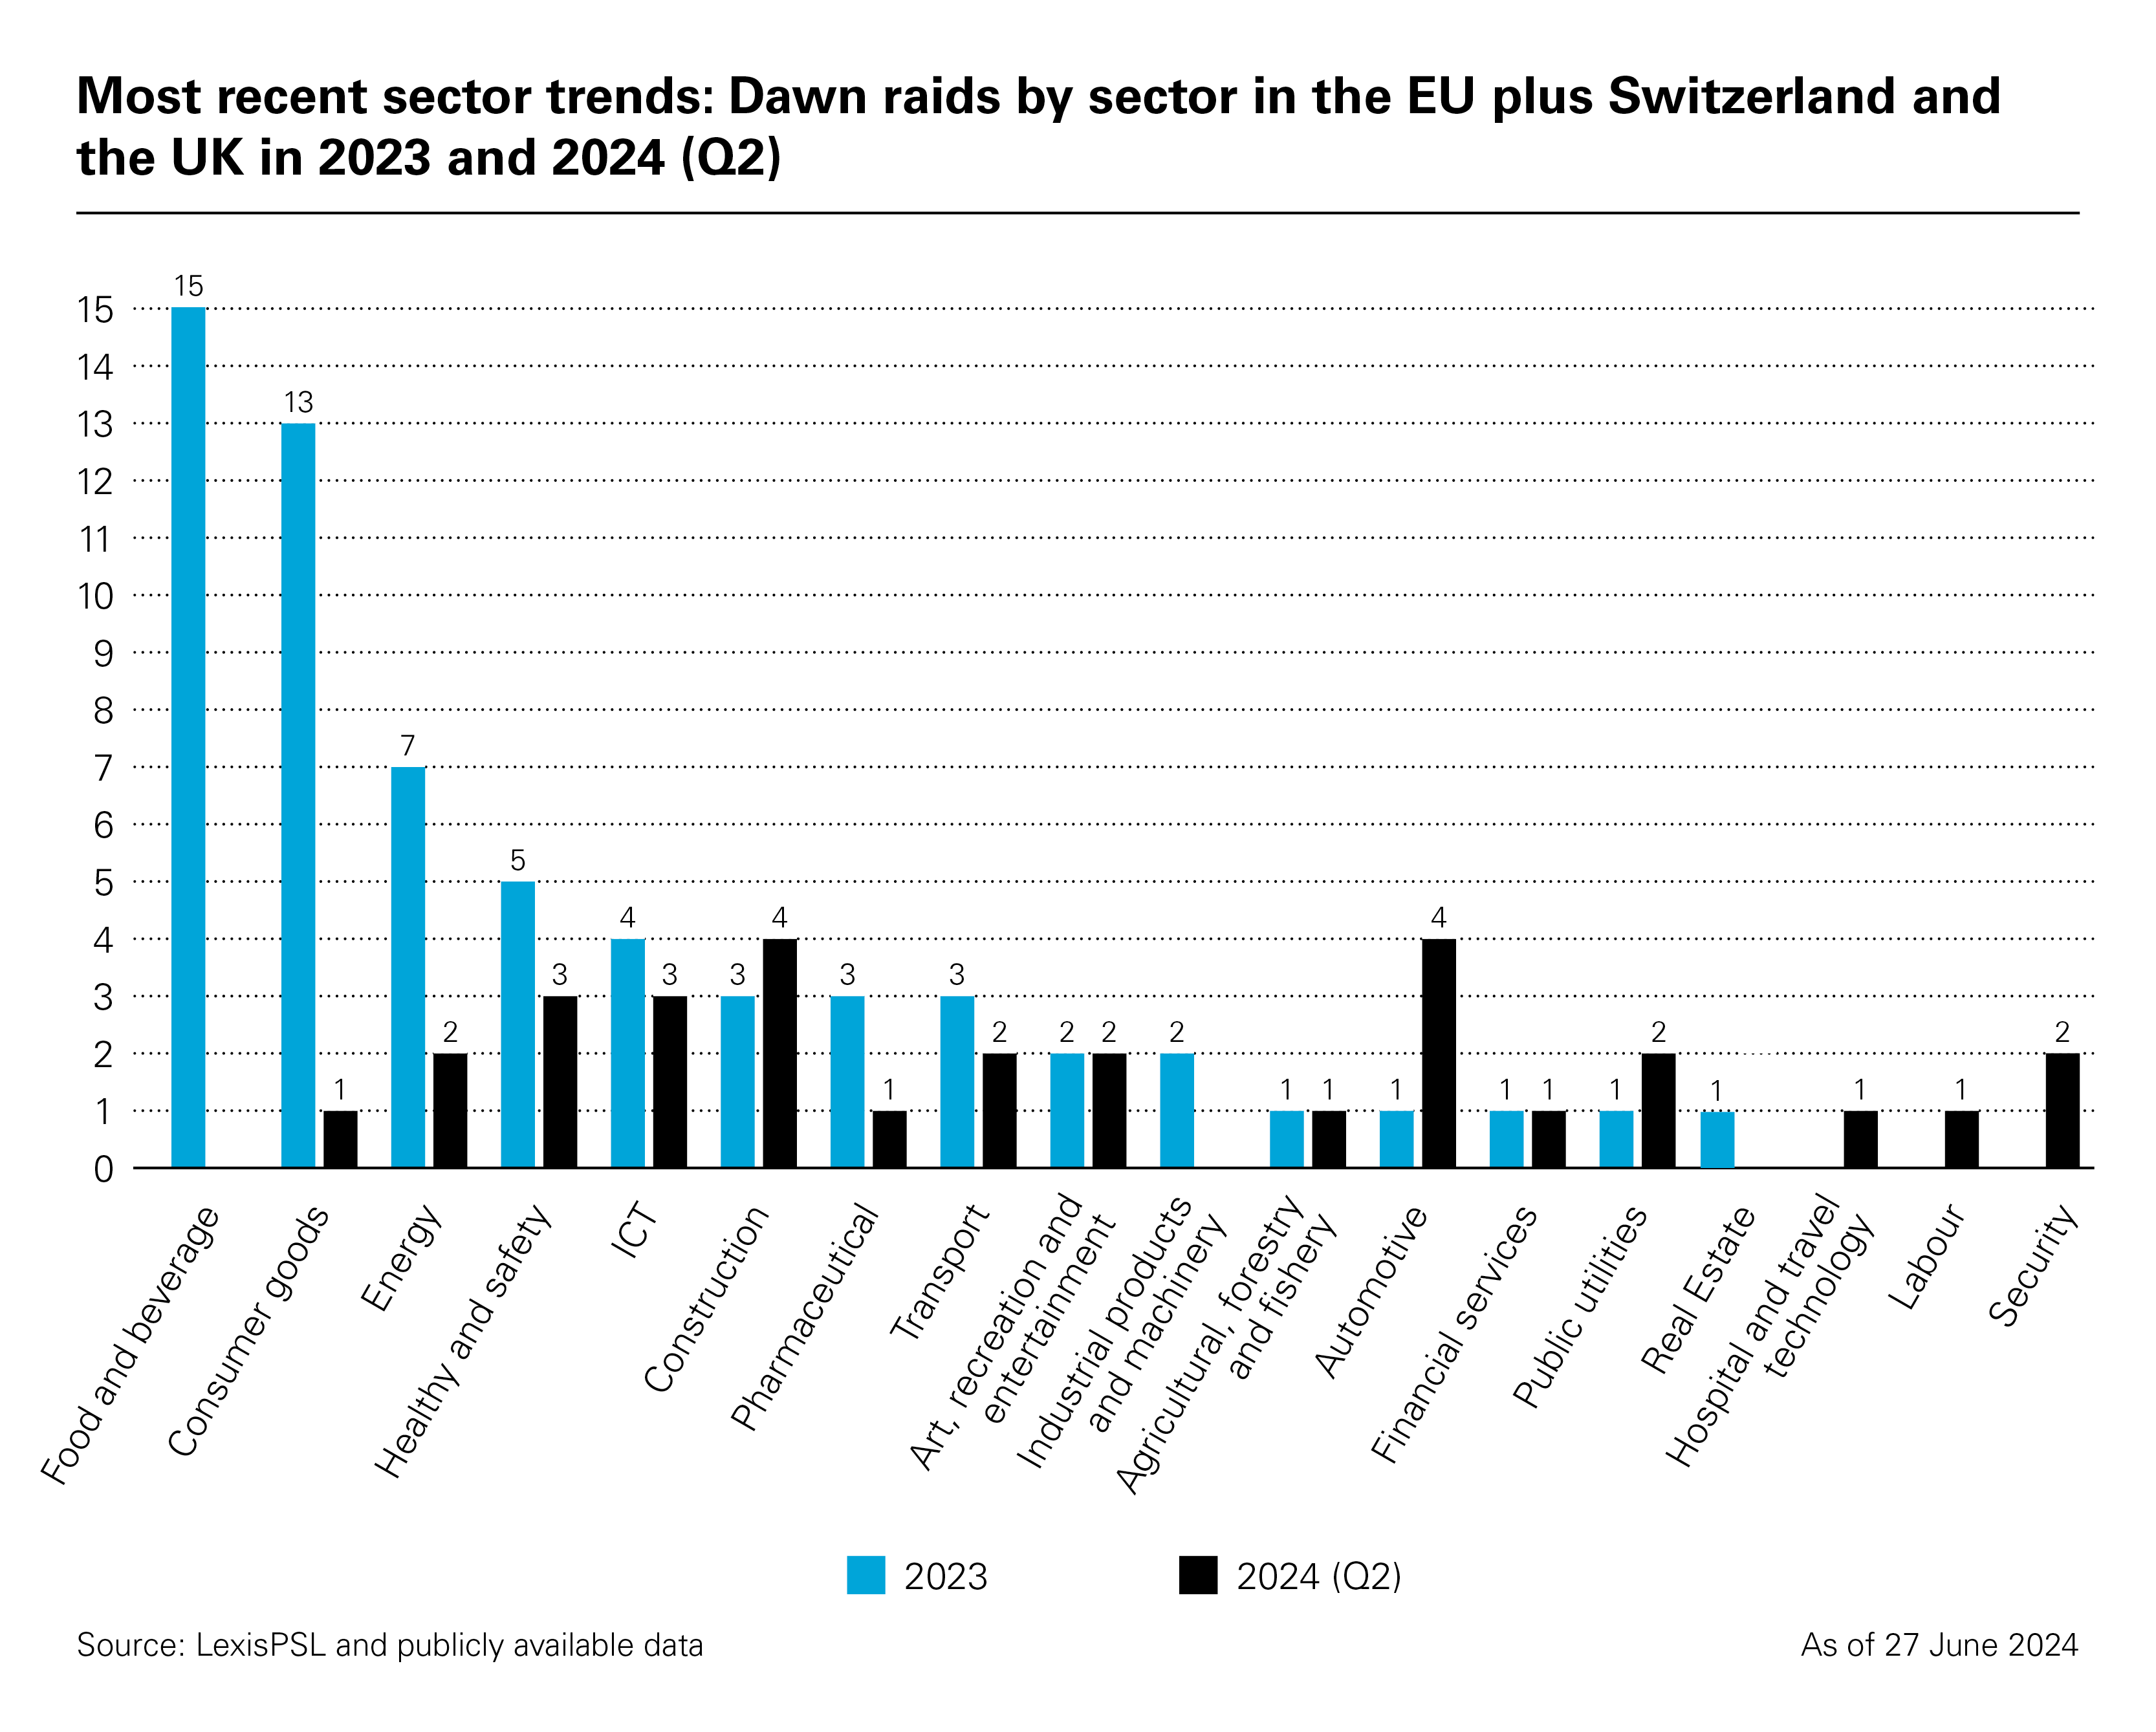 View full image: Most recent sector trends: Dawn raids by sector in the EU plus Switzerland and the UK in 2023 and 2024 (Q2) (PDF)